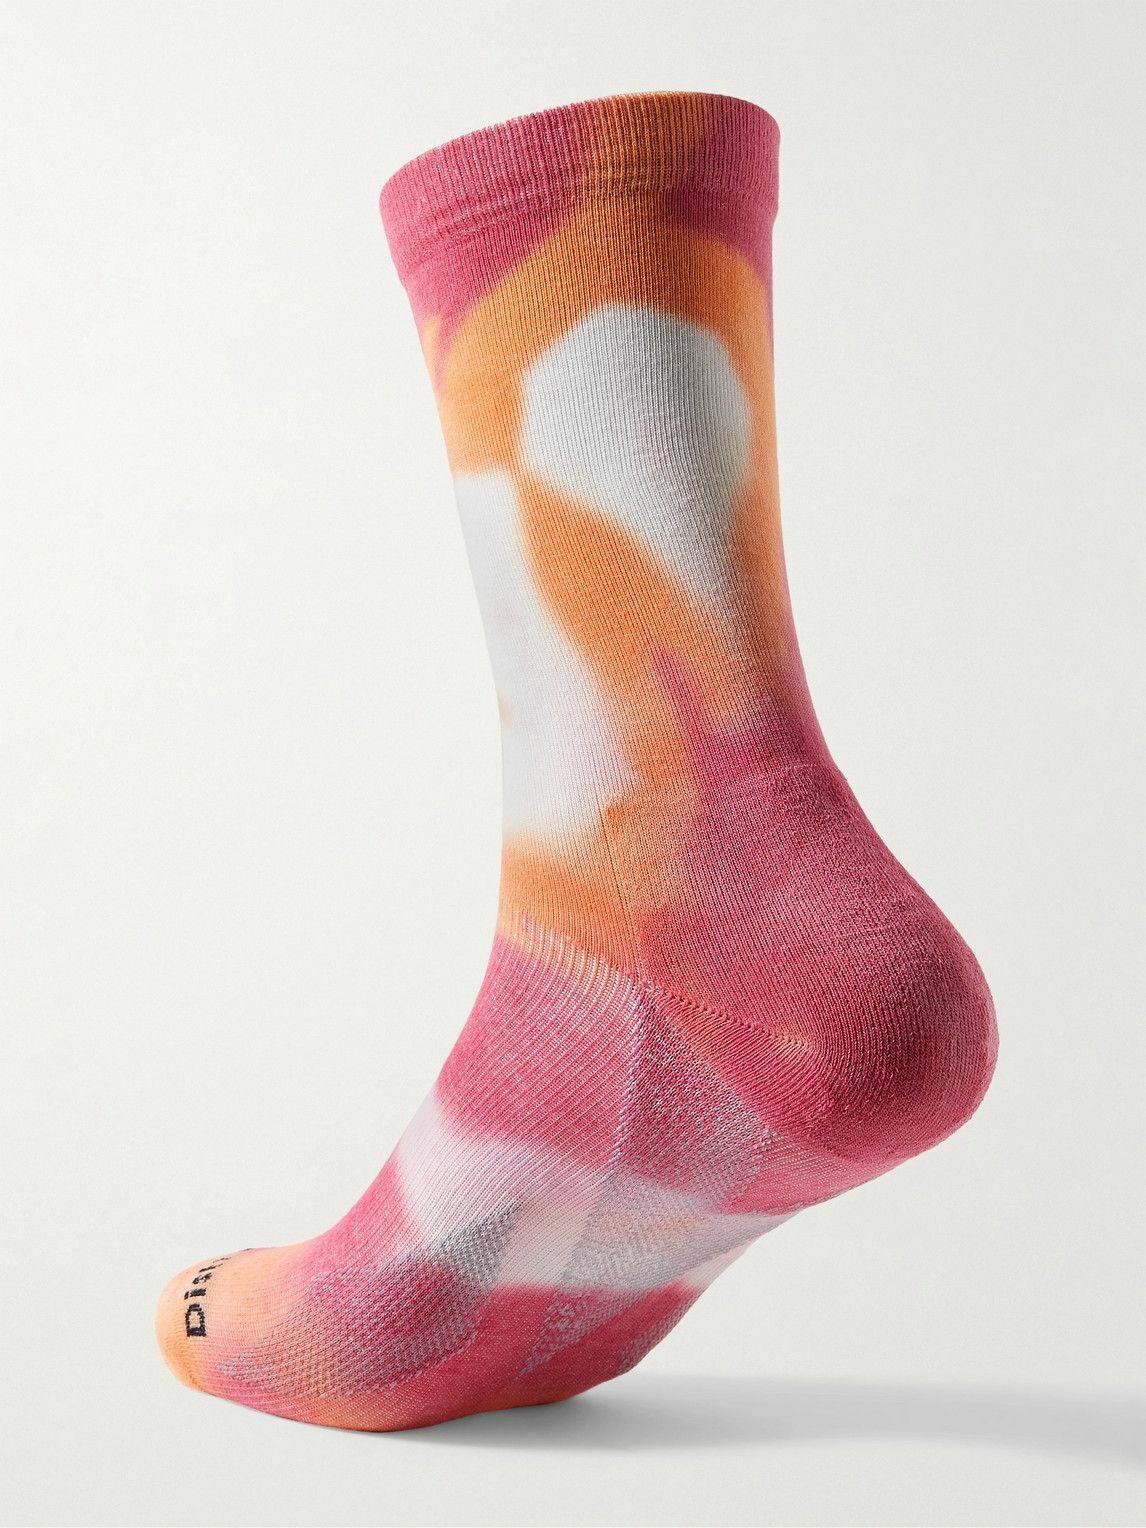 DISTRICT VISION - Yoshi Tie-Dyed Cotton Socks - Red District Vision